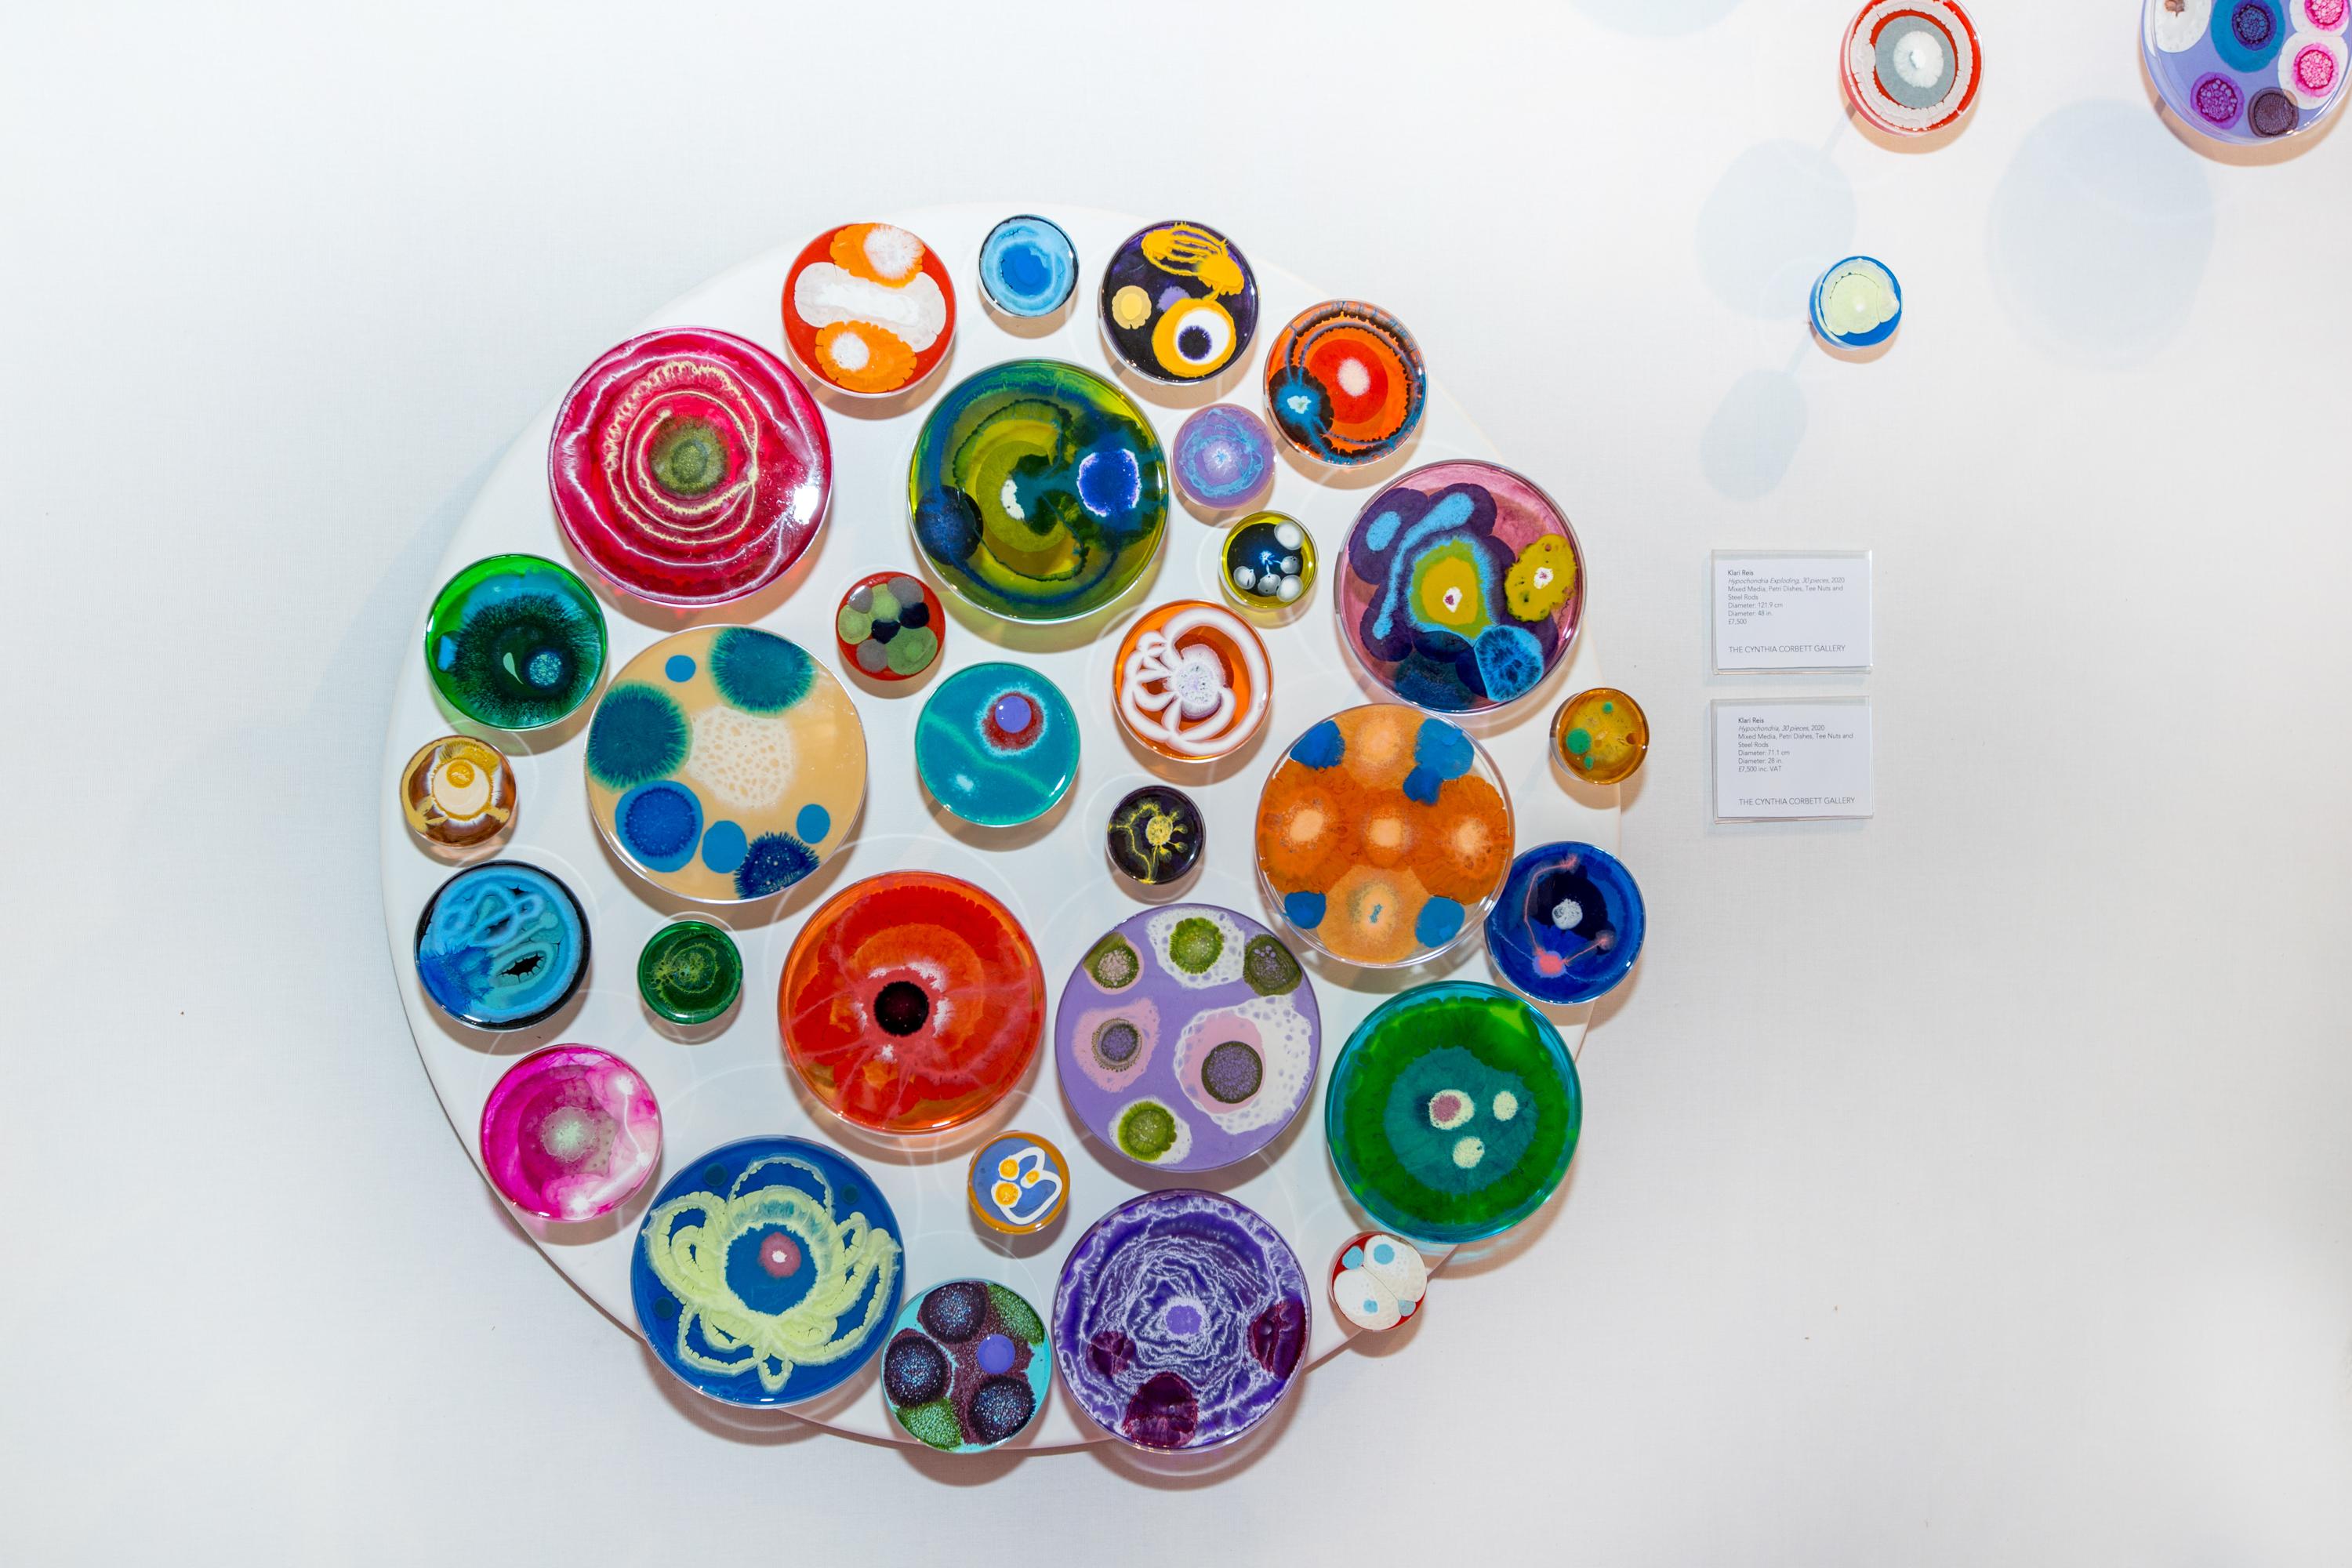 Hypochondria 30 pieces, Bright coloured smears, bump and blobs on Petri Dishes.  - Contemporary Mixed Media Art by Klari Reis